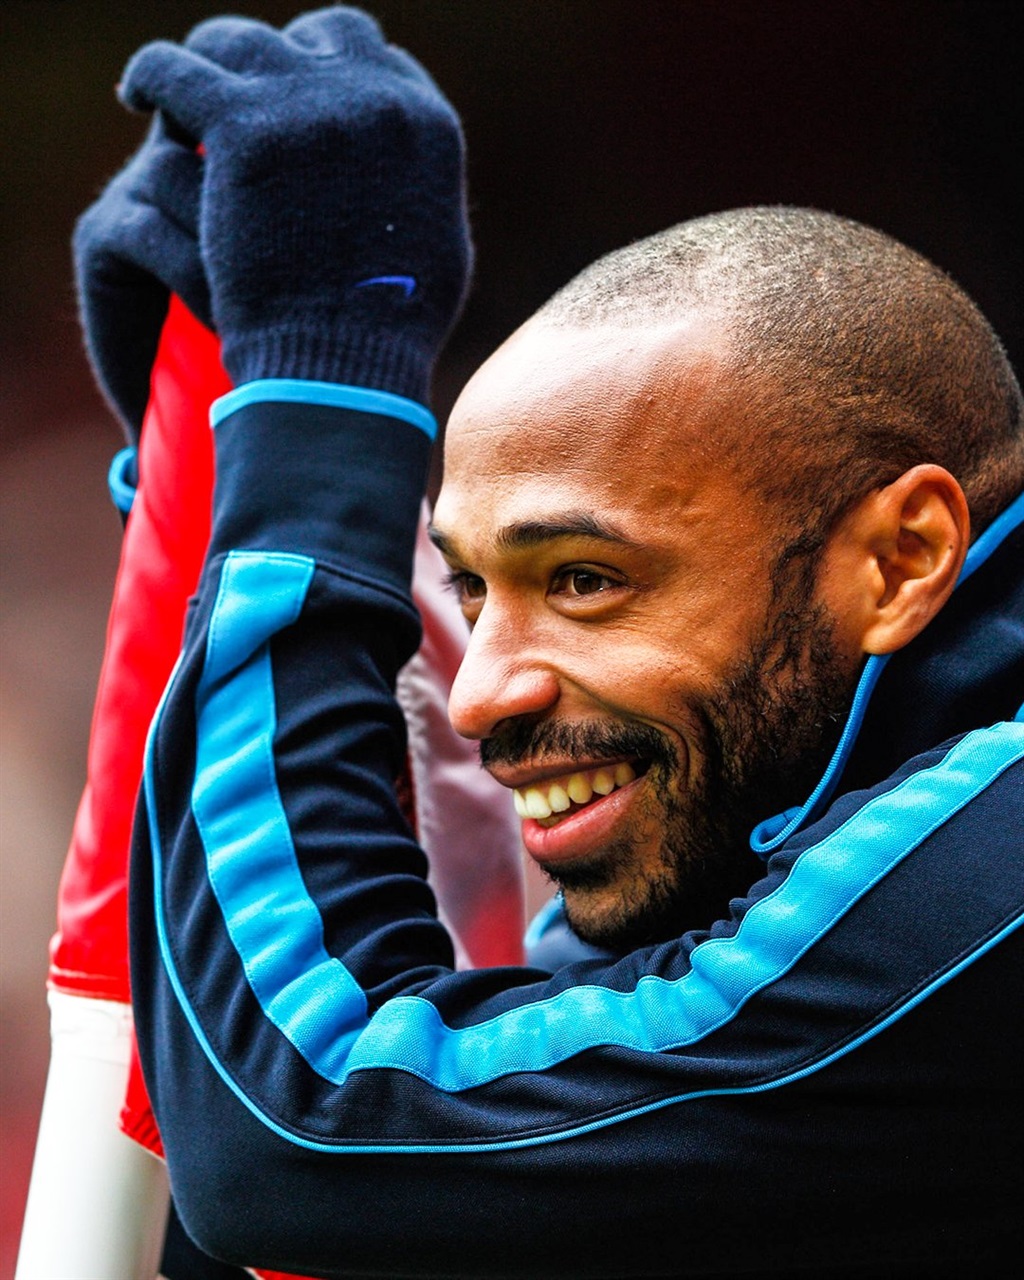 Arsenal legend Thierry Henry revealed his mental health struggles during his days as a player, relating to Bafana Bafana striker Lyle Foster.